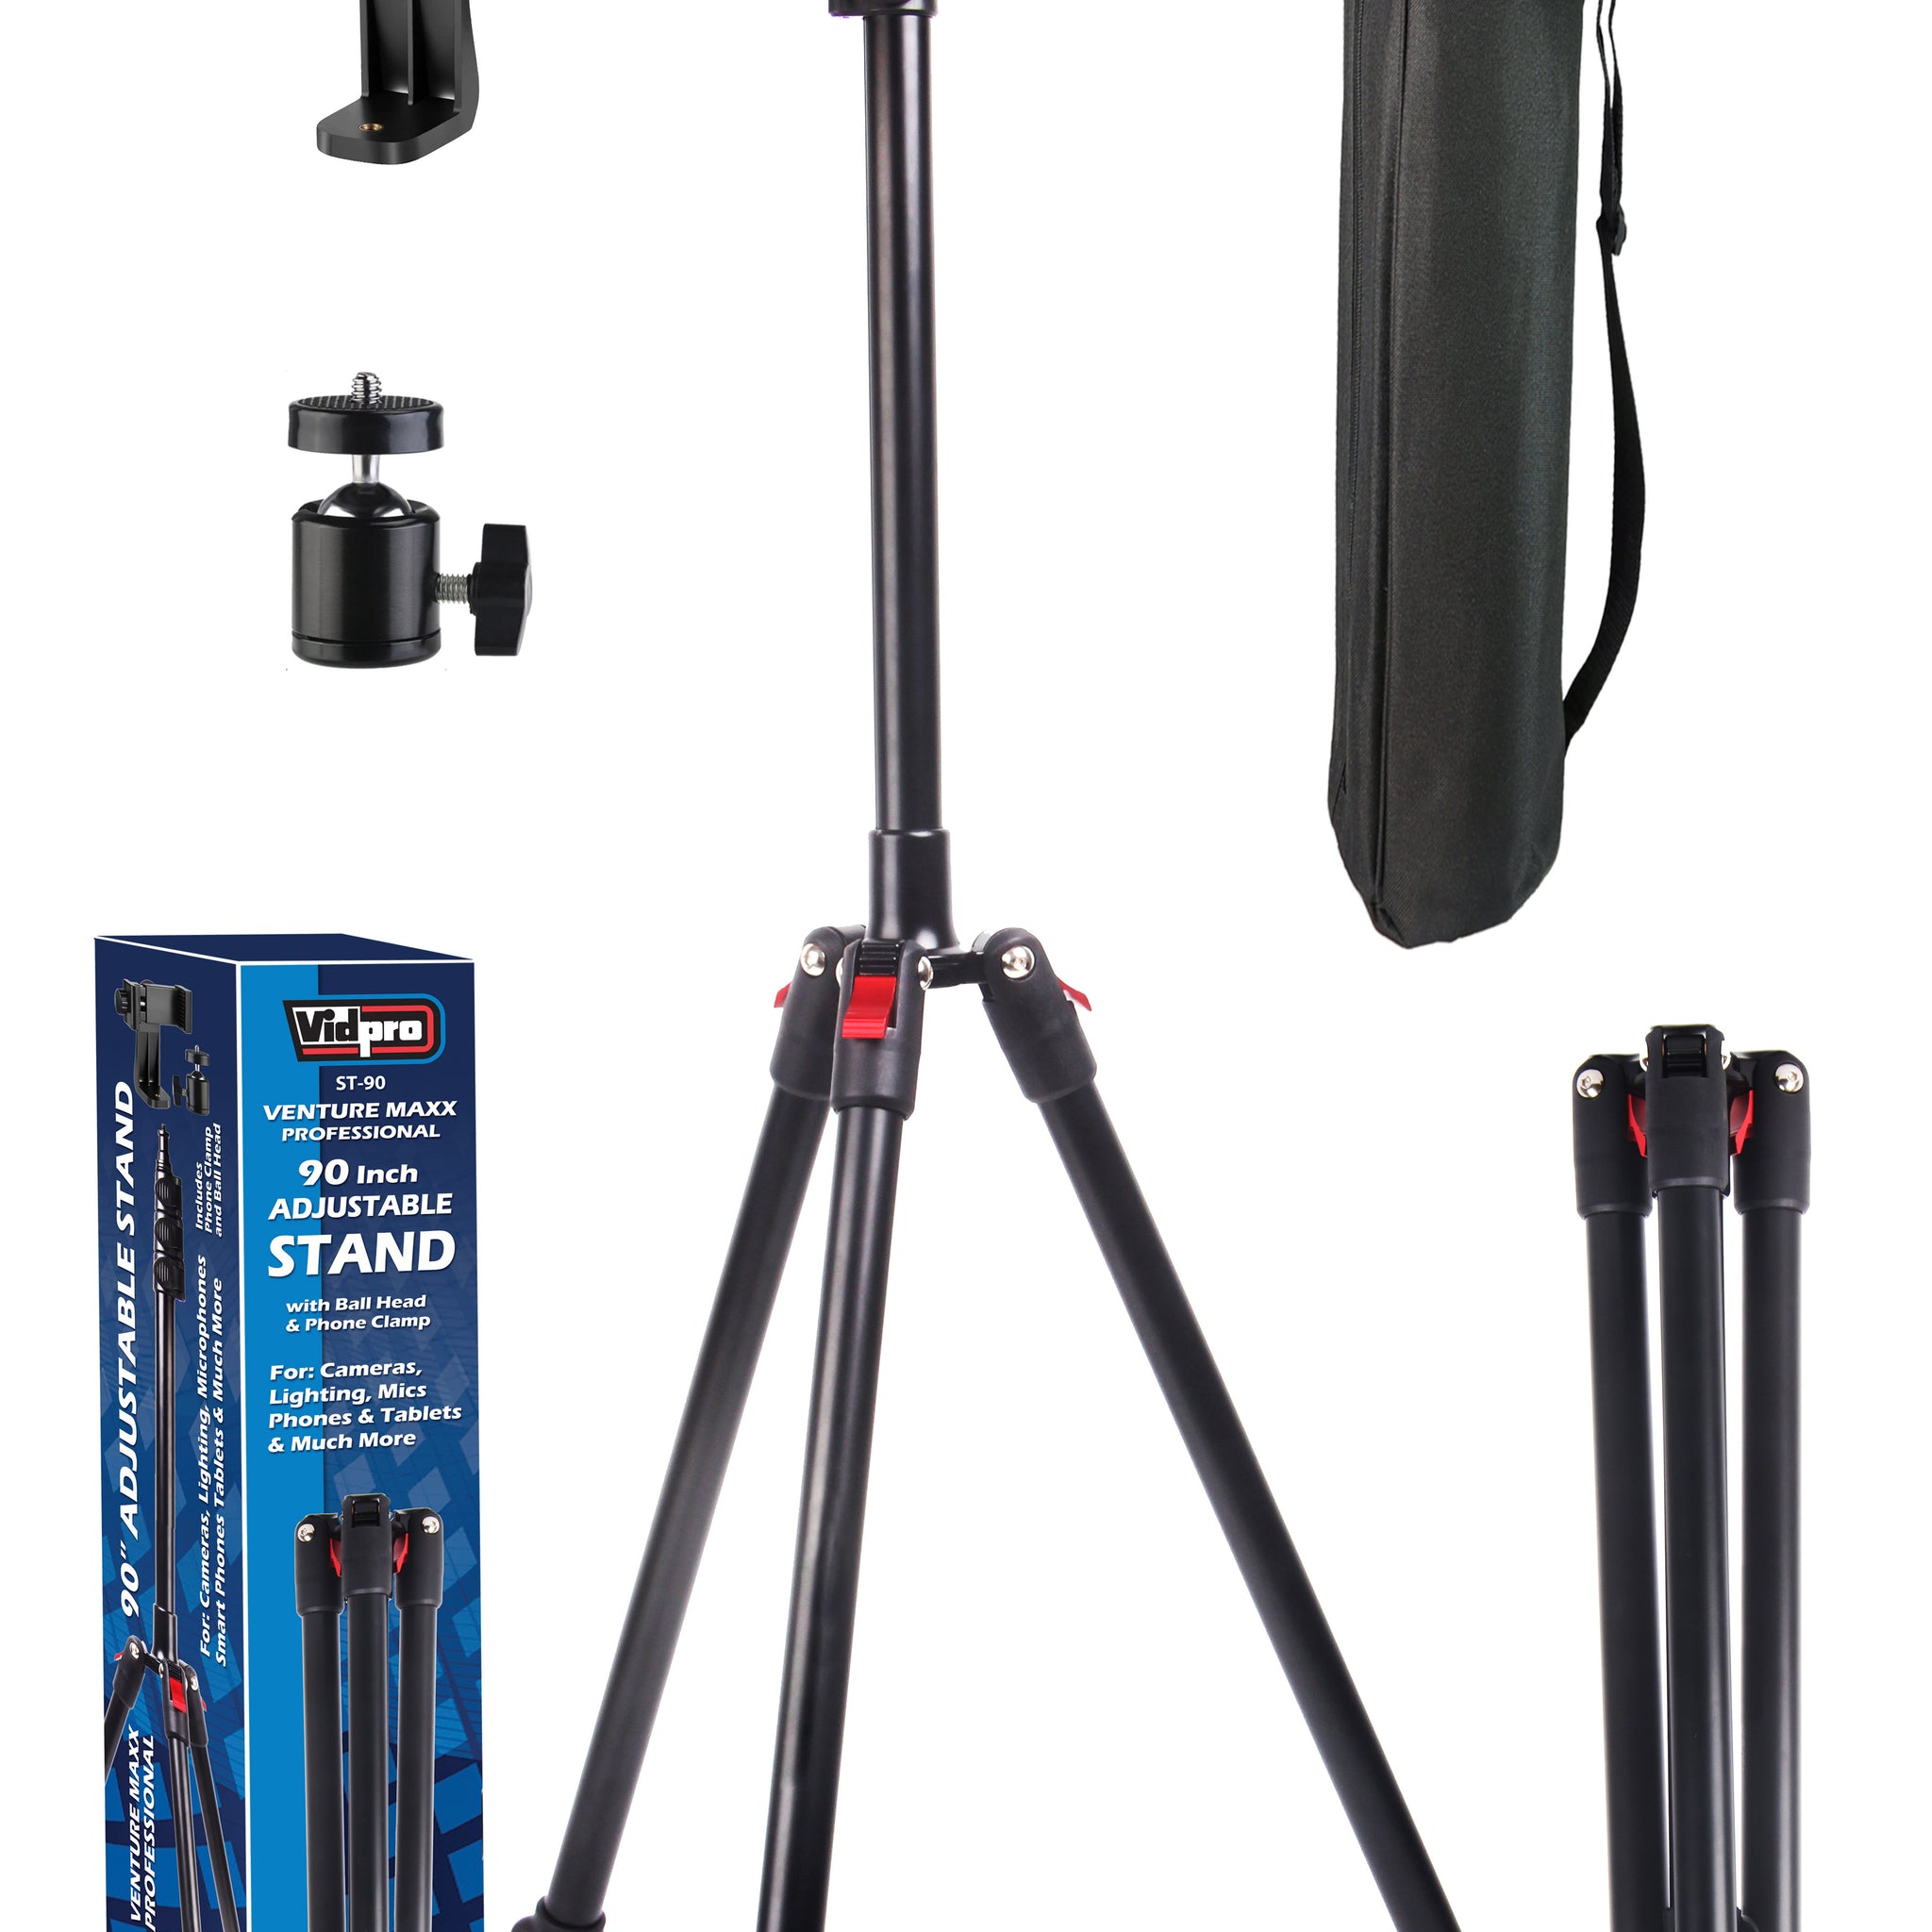 Vidpro ST-90  Adjustable 90" Stand For Cameras, Lighting and Audio Equipment